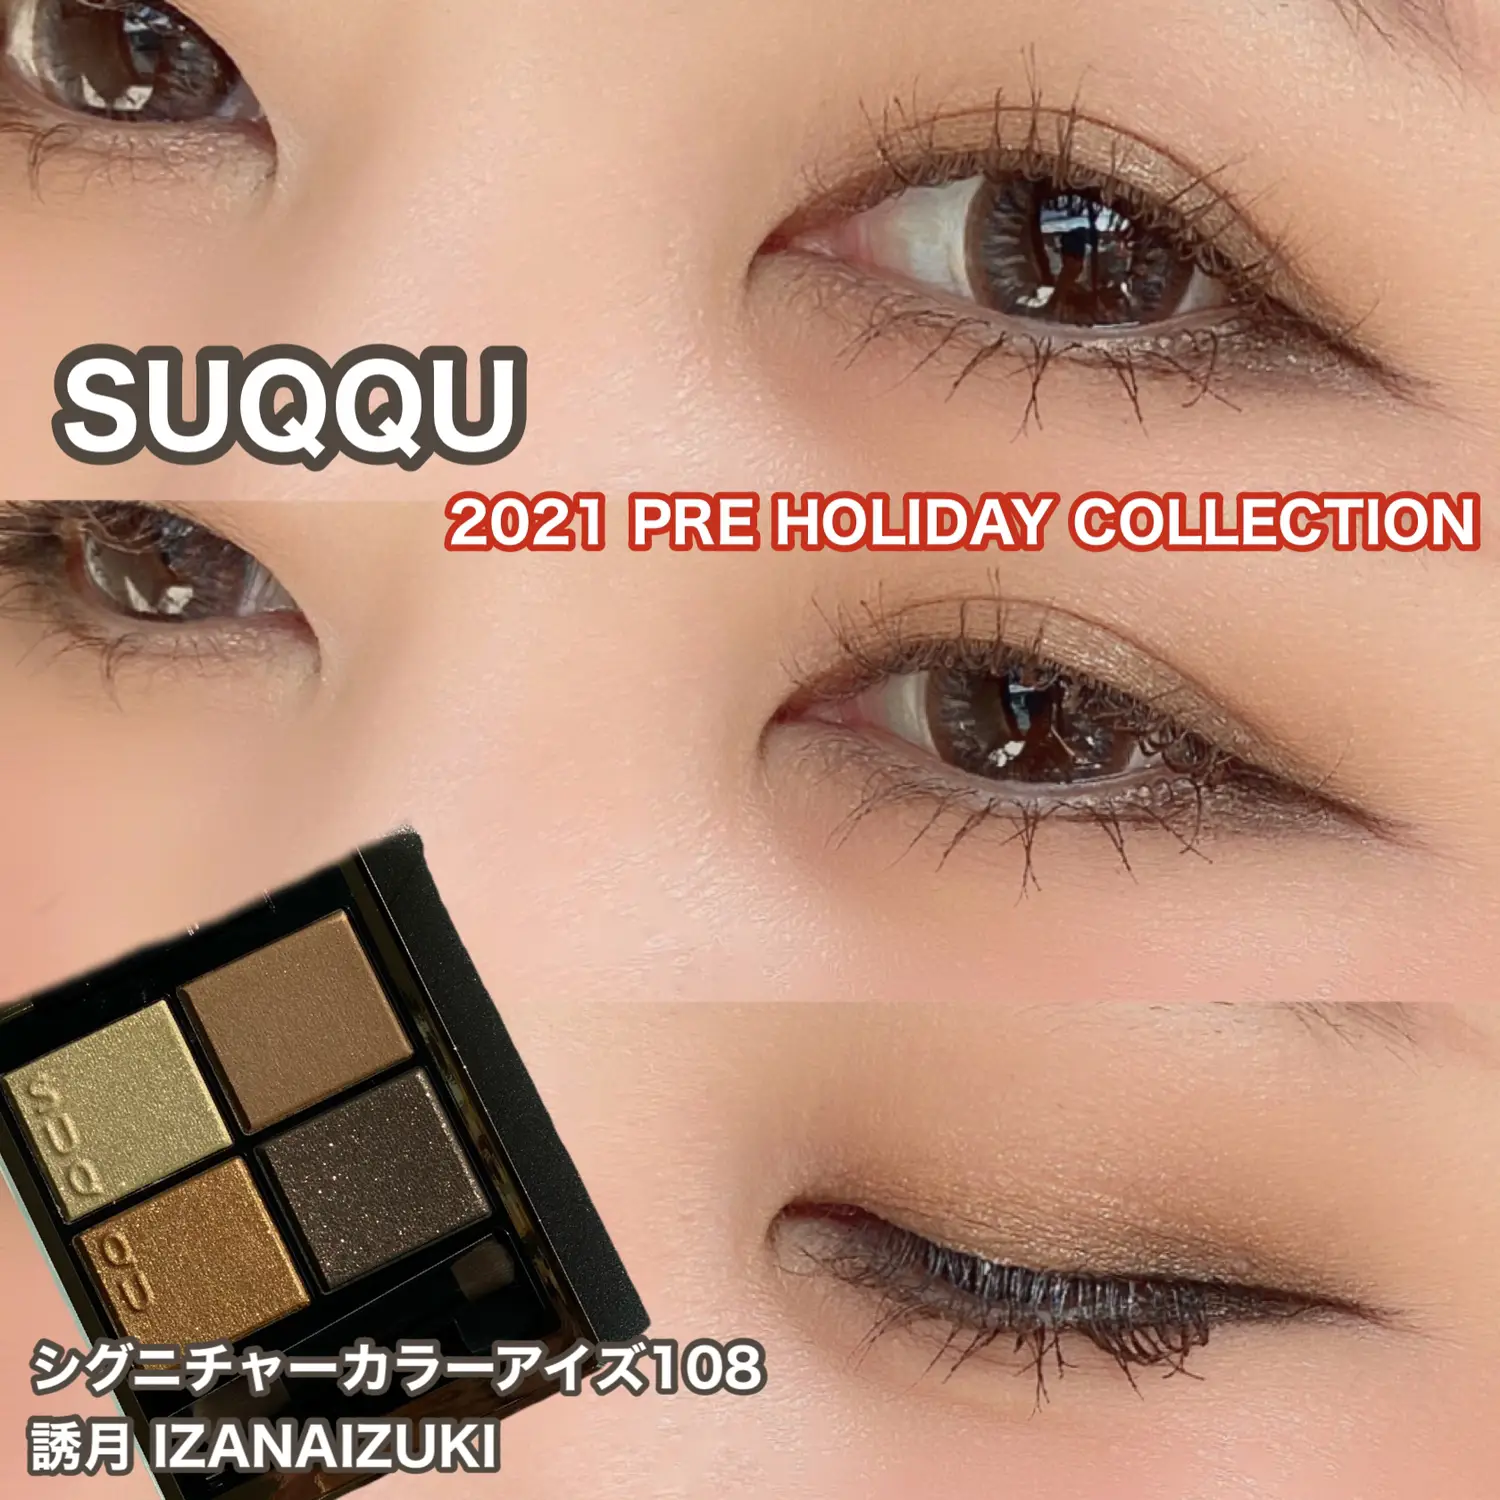 SUQQU 2021 PRE HOLIDAY COLLECTION🎄『誘月』でキラキラスモーキー